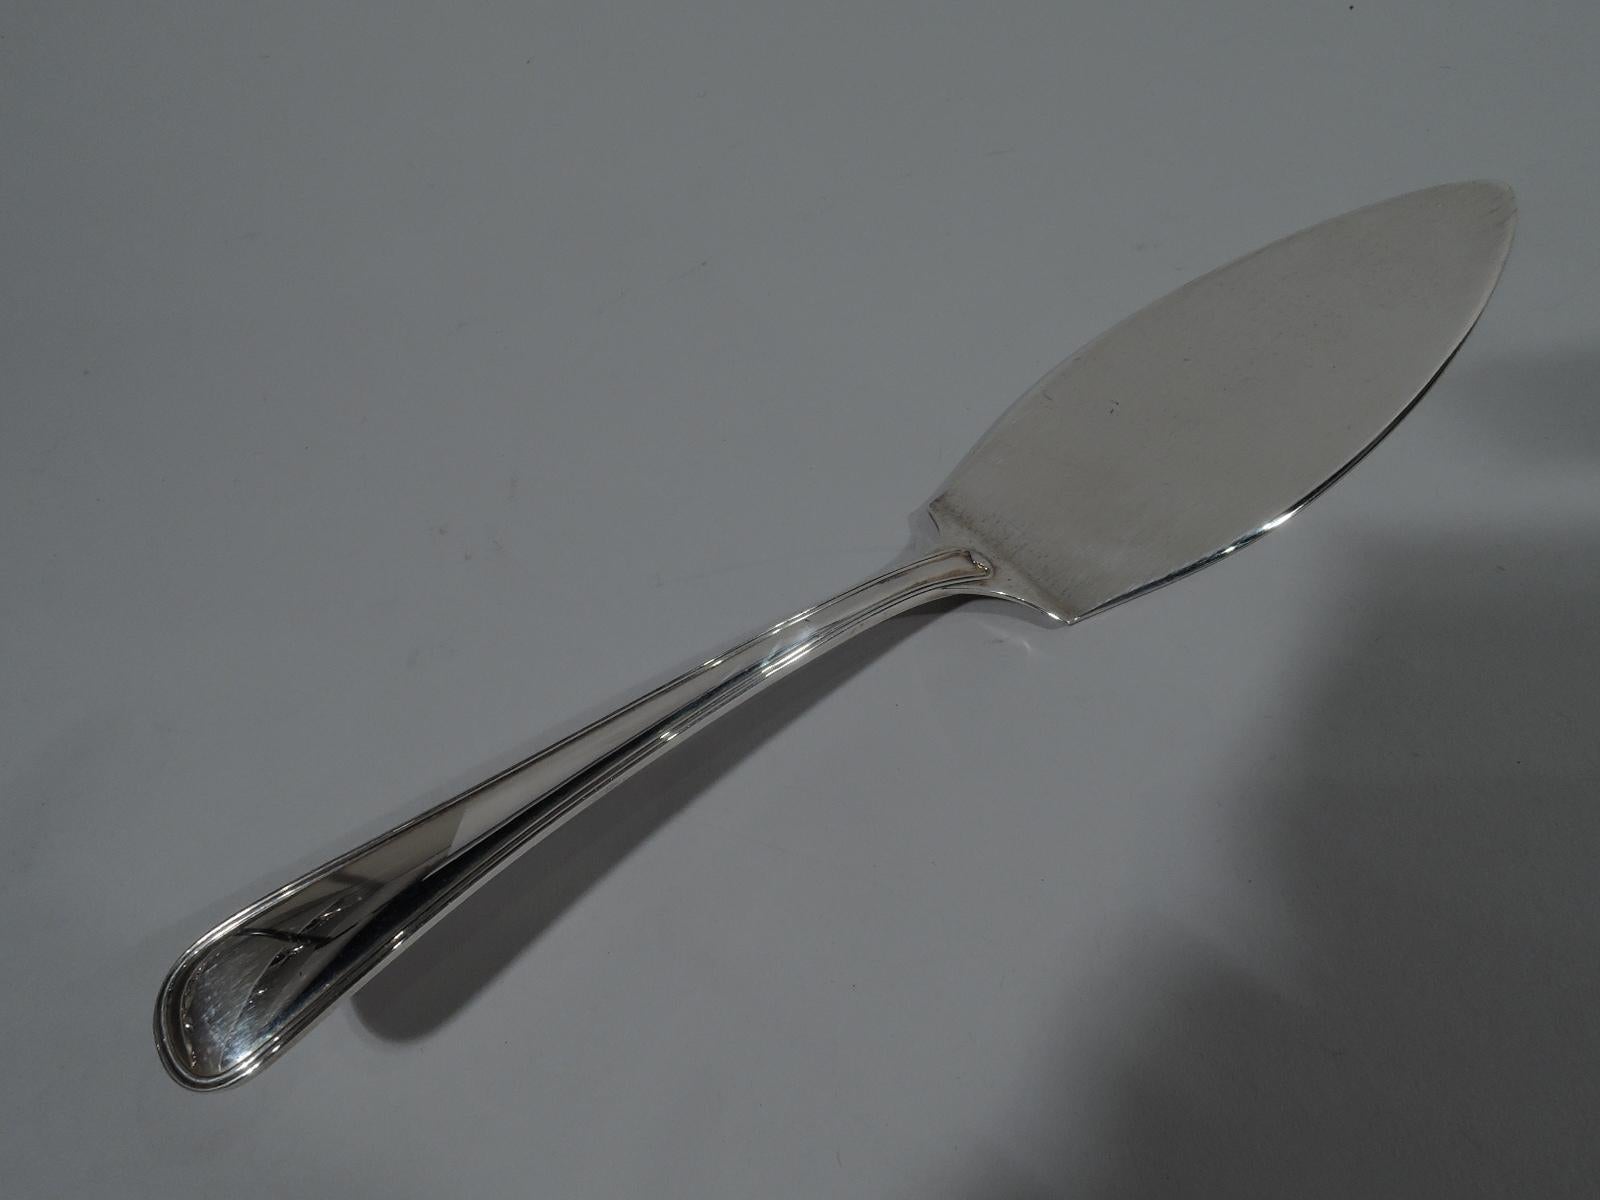 Sterling silver server in Palm Beach pattern. Made by Buccellati in Italy. Threaded and tapering handle and flat ovalish blade. Gift-quality presentation in cloth case with maker’s stamp. Fully marked. 

Dimensions: Server L 10 3/8 in., case 1 5/8